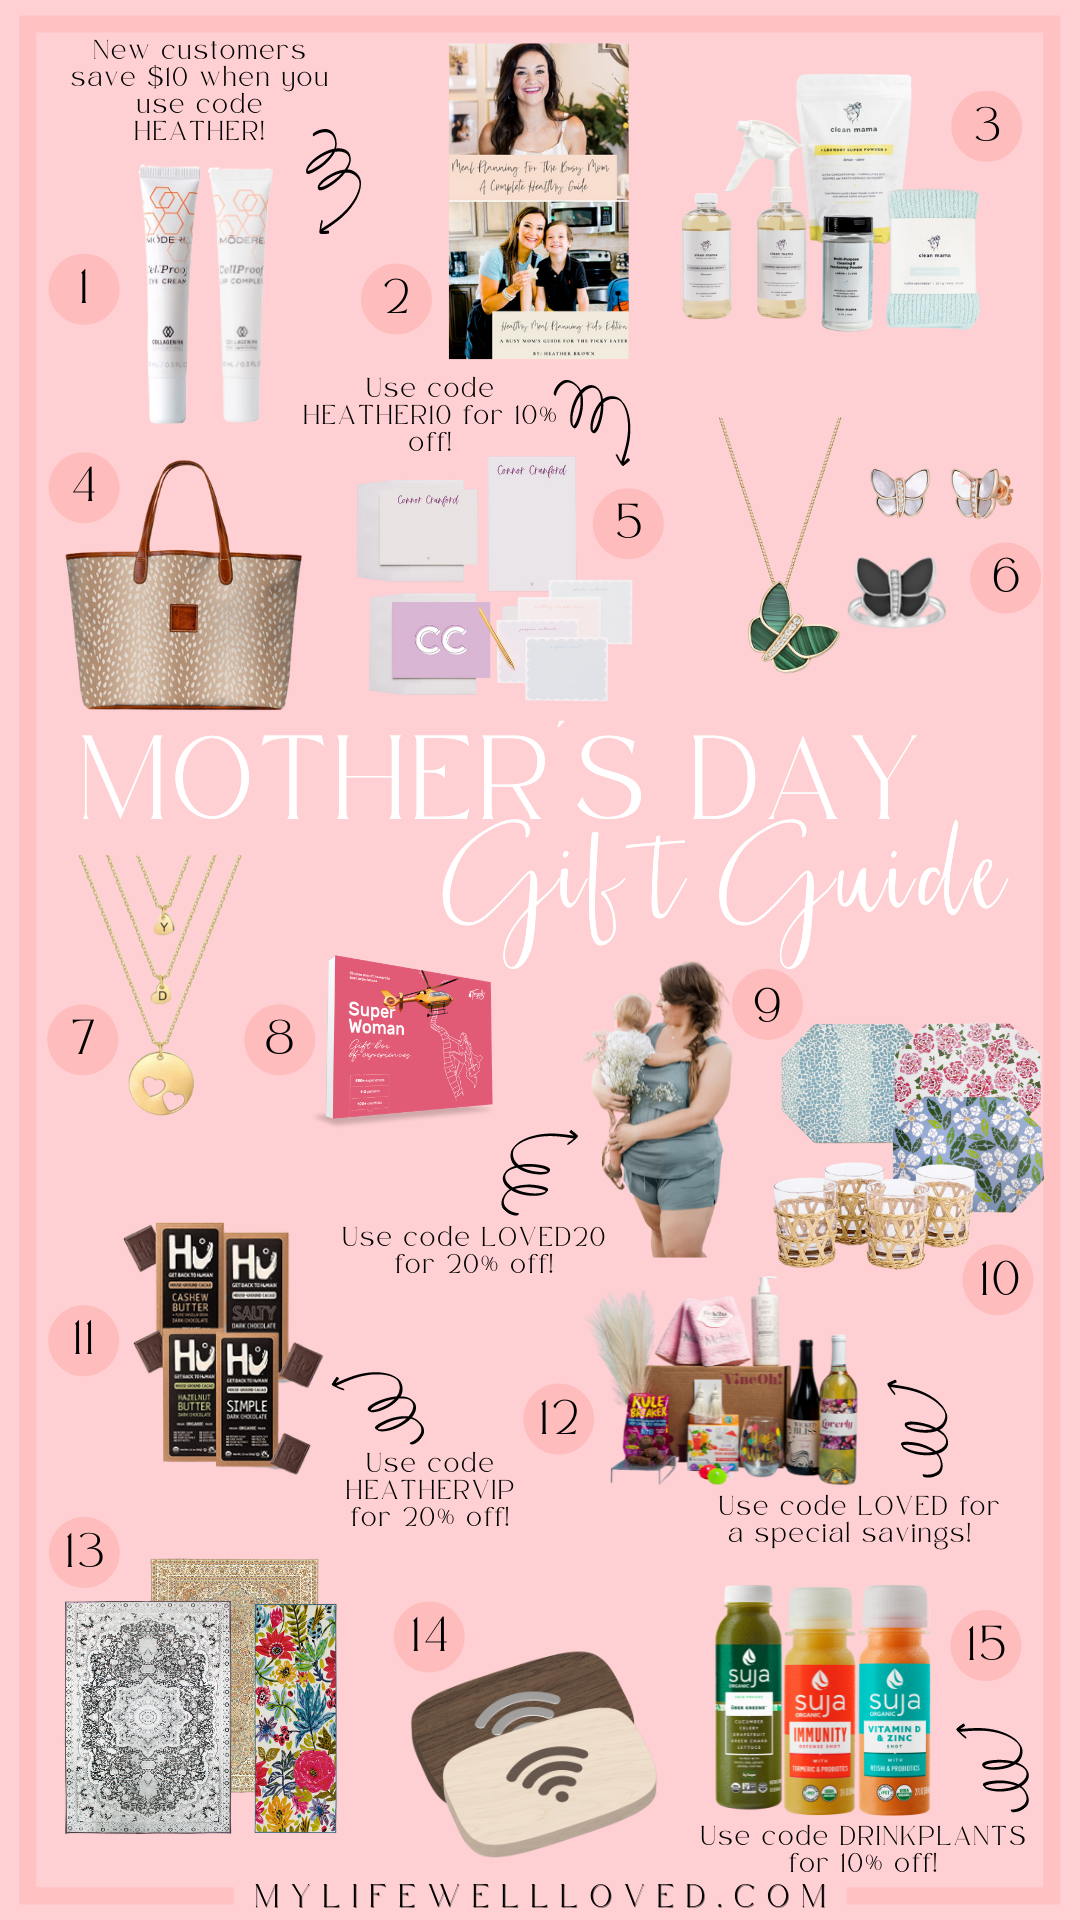 Mothers Day Gifts Ideas Under $10 - Real Advice Gal  Best mothers day gifts,  Gifts under 10, Mother's day gifts